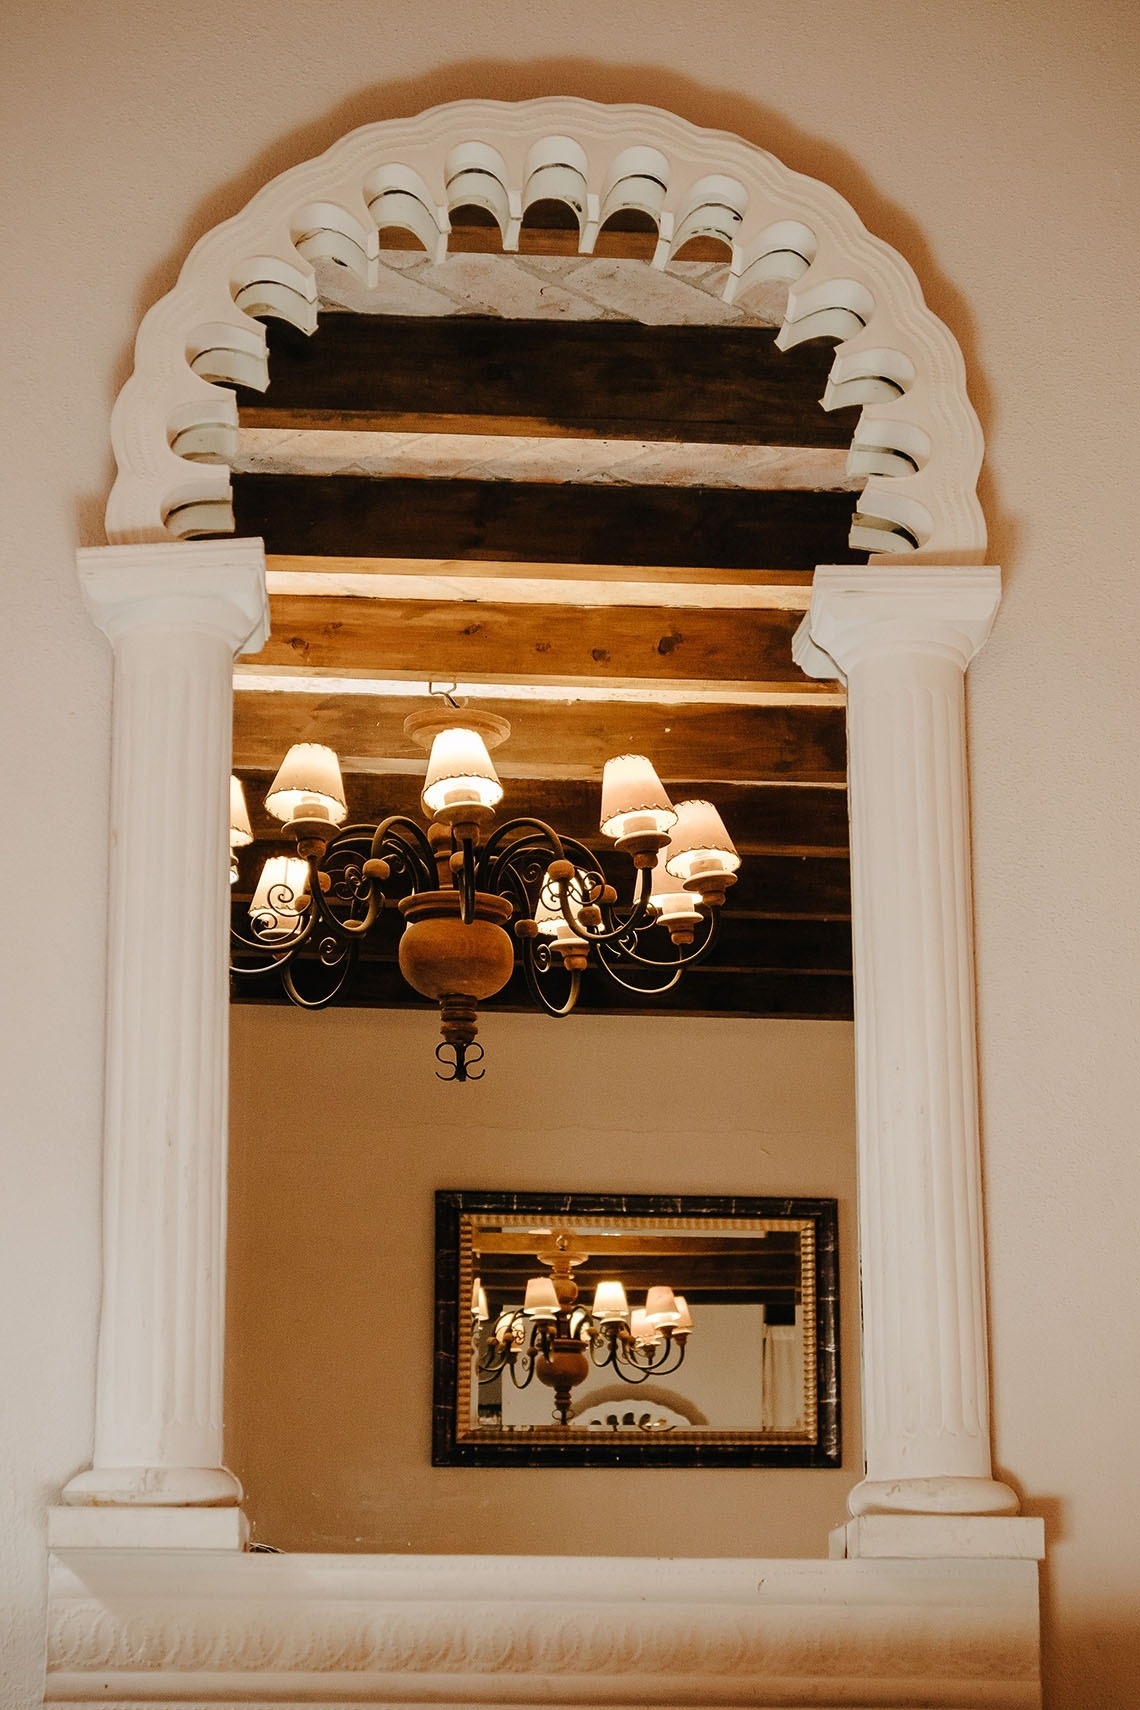 Large and bright mirror